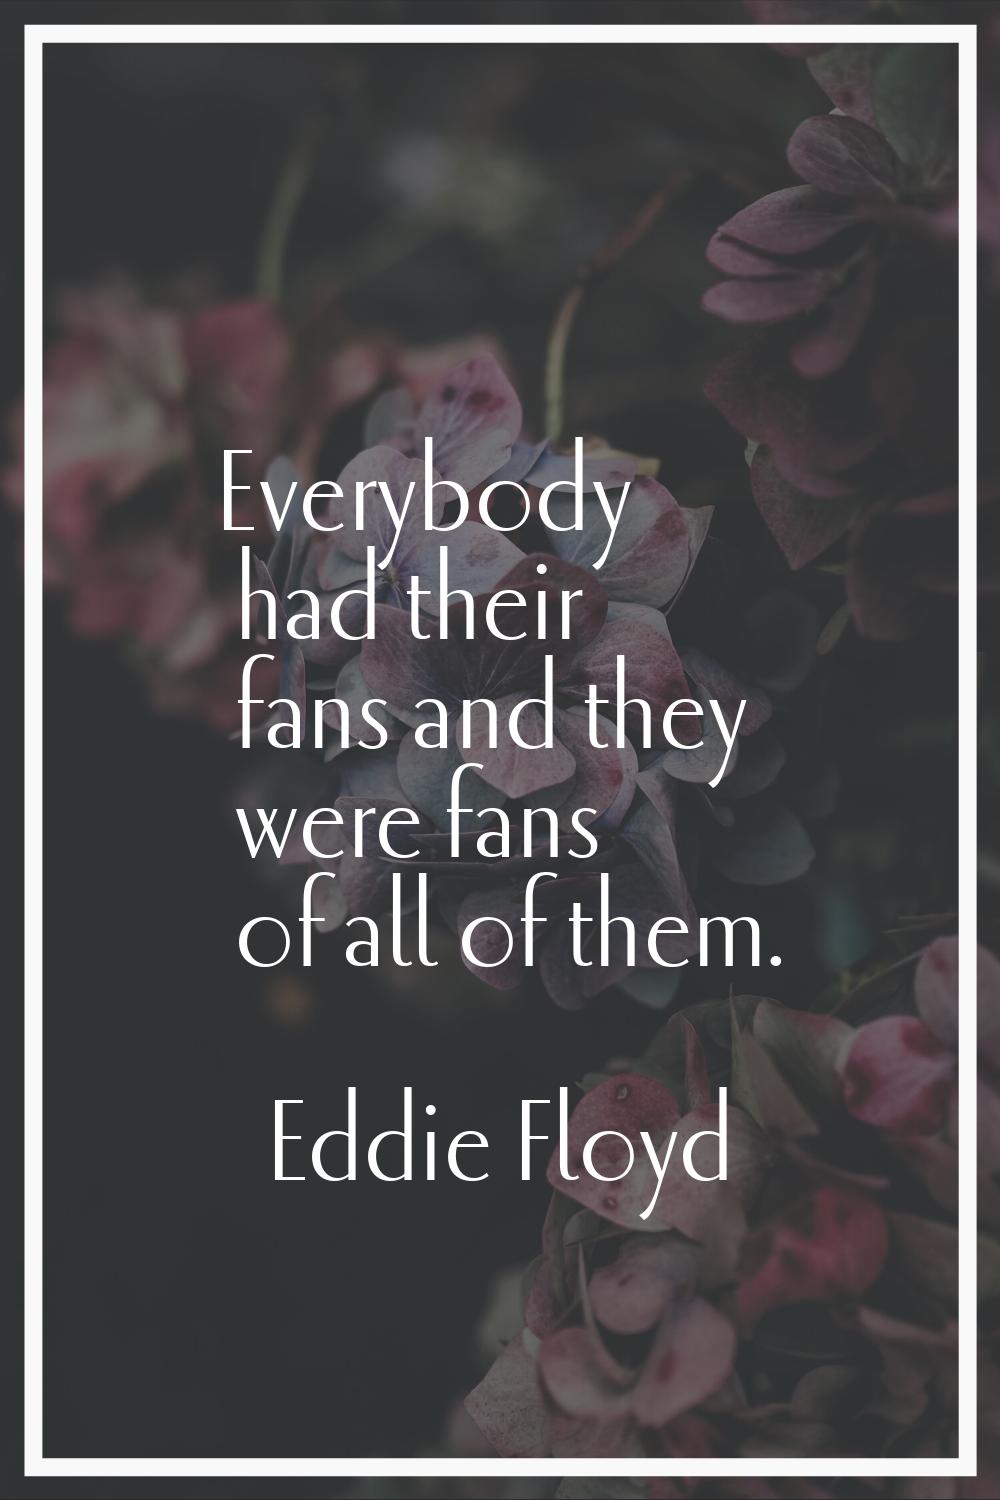 Everybody had their fans and they were fans of all of them.